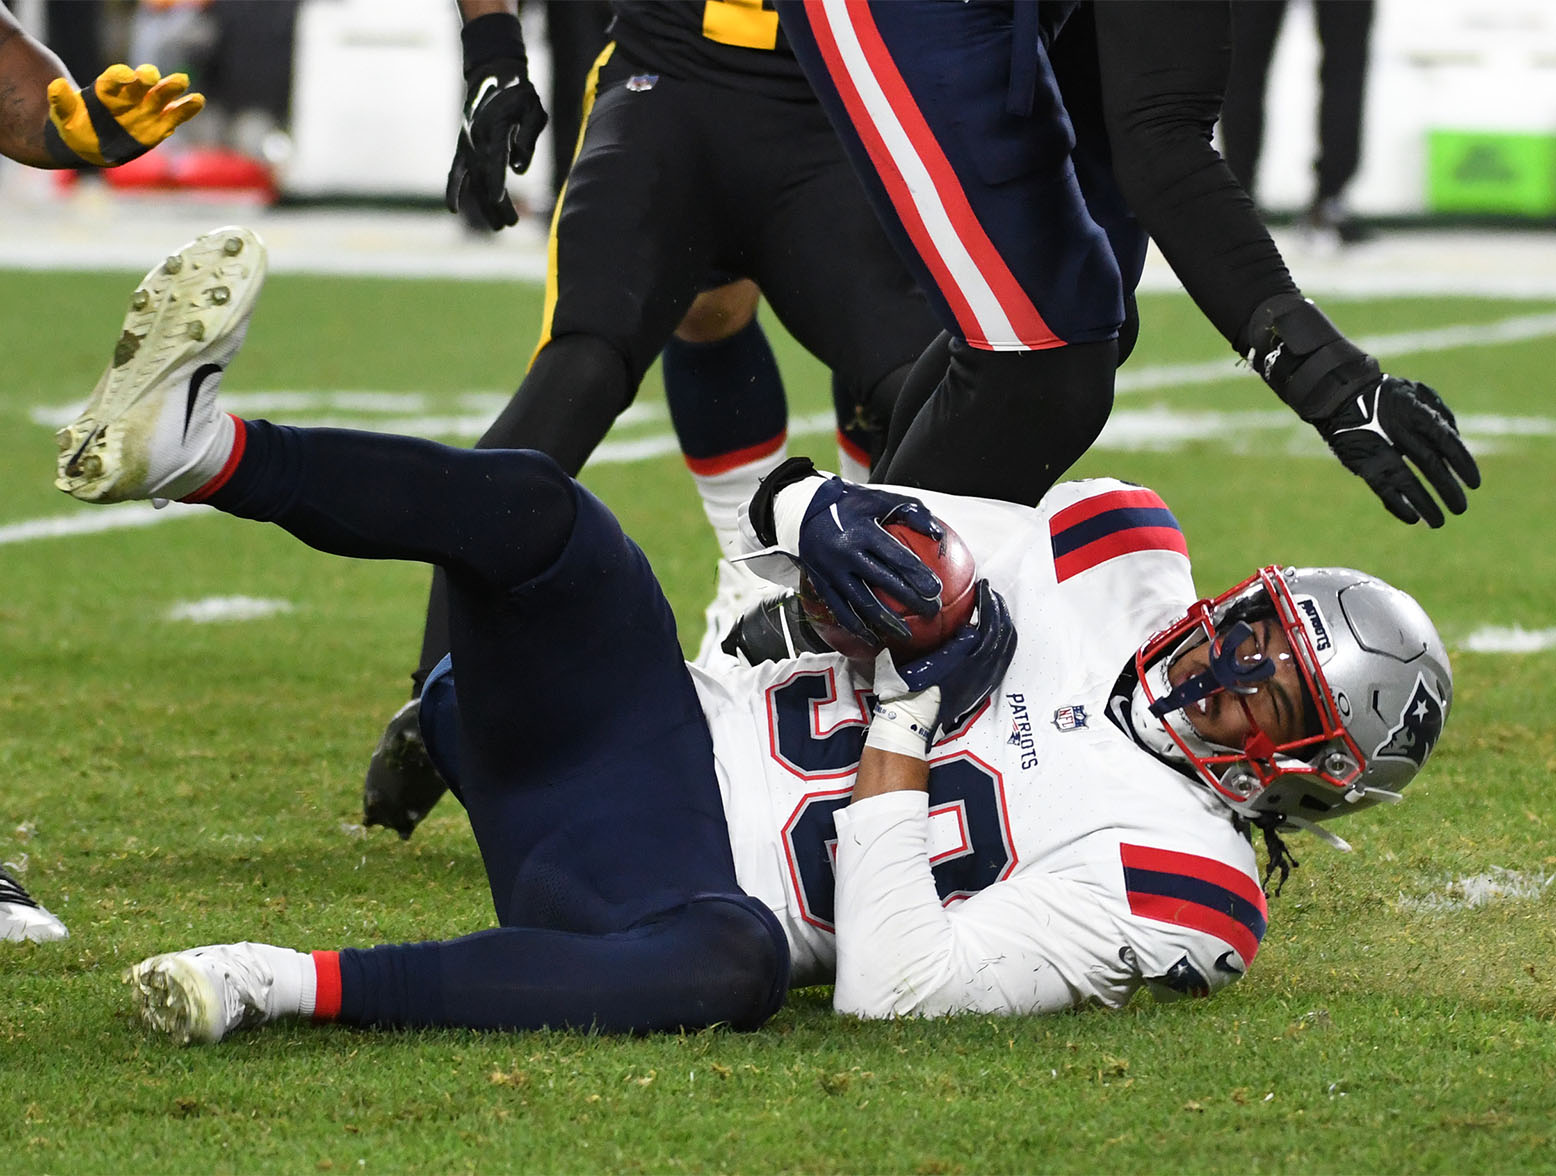 Dec 7, 2023; Pittsburgh, Pennsylvania, USA; New England Patriots special teams player Marte Mapu (30) recovers a blocked punt against the Pittsburgh Steelers during the fourth quarter at Acrisure Stadium. Mandatory Credit: Philip G. Pavely-USA TODAY Sports